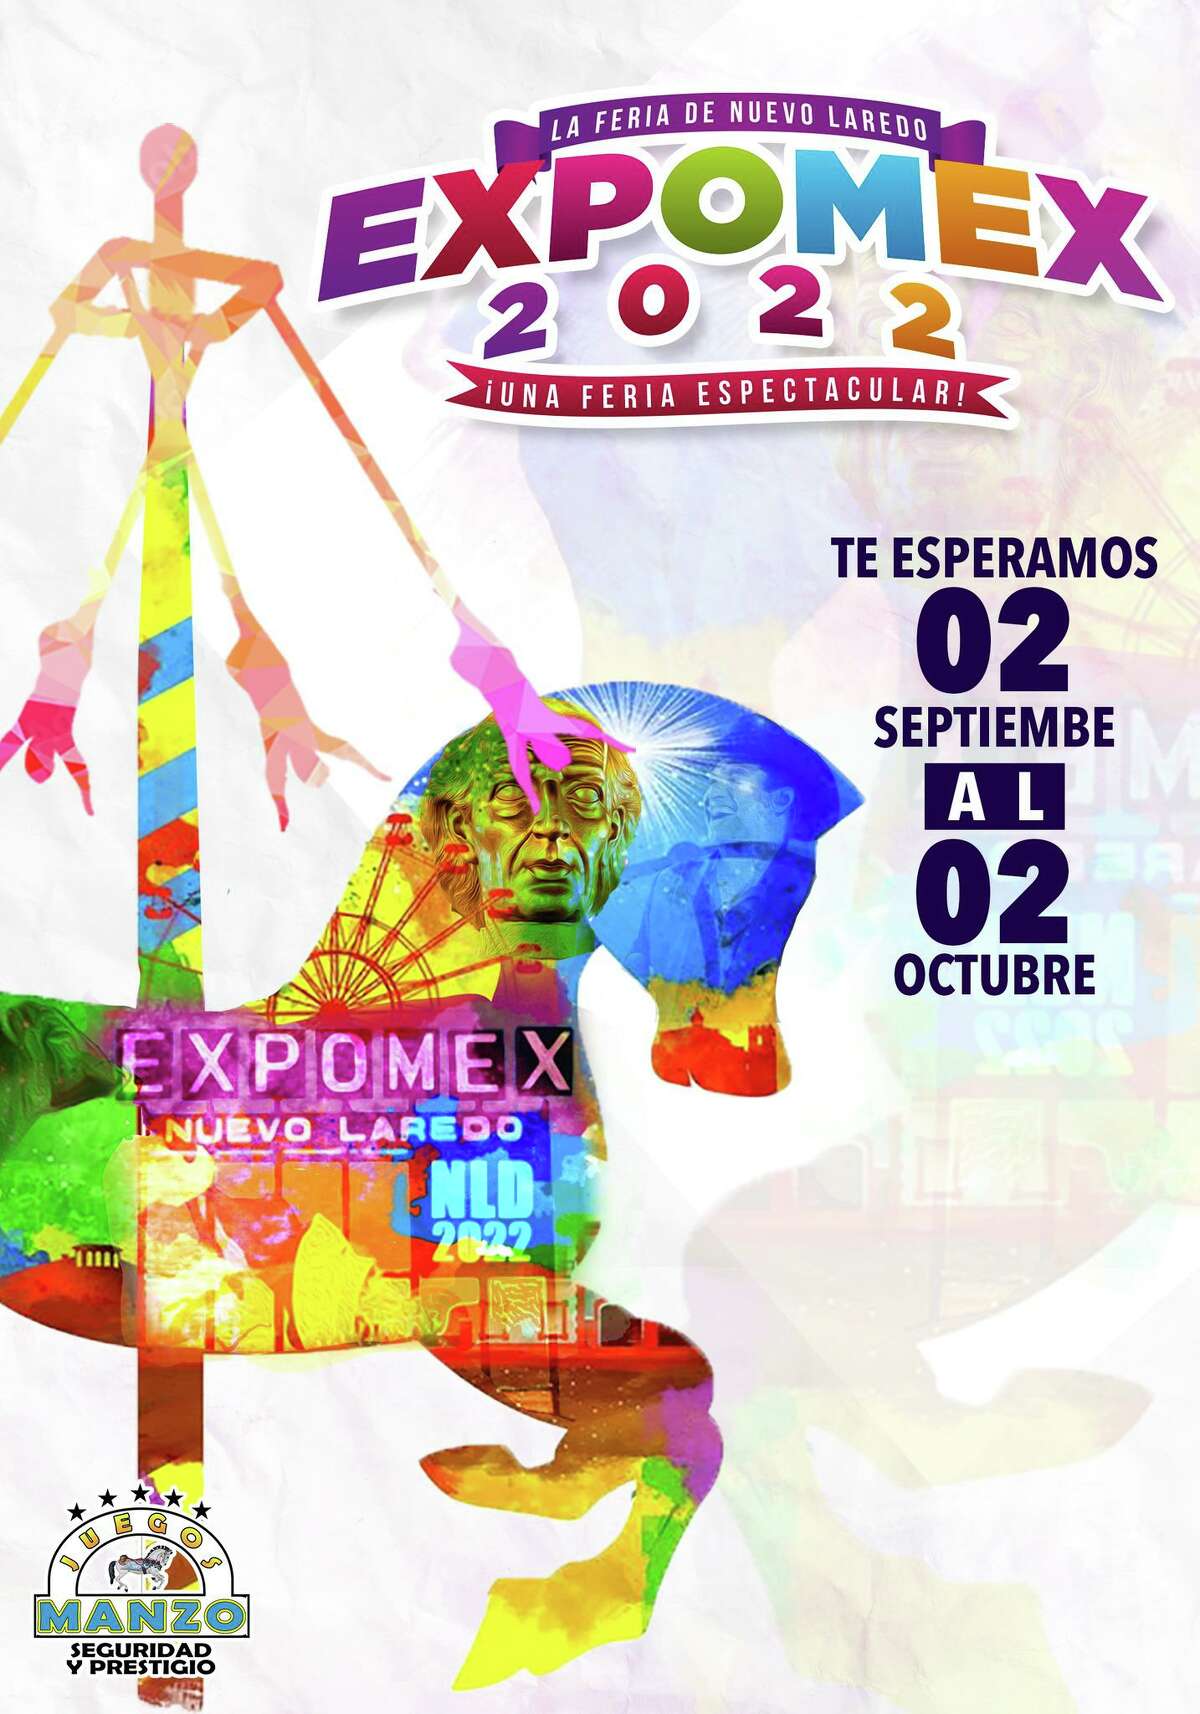 After being suspended due to COVID restrictions, Expomex is now back to Nuevo Laredo from September 2nd to October 3rd, 2022.